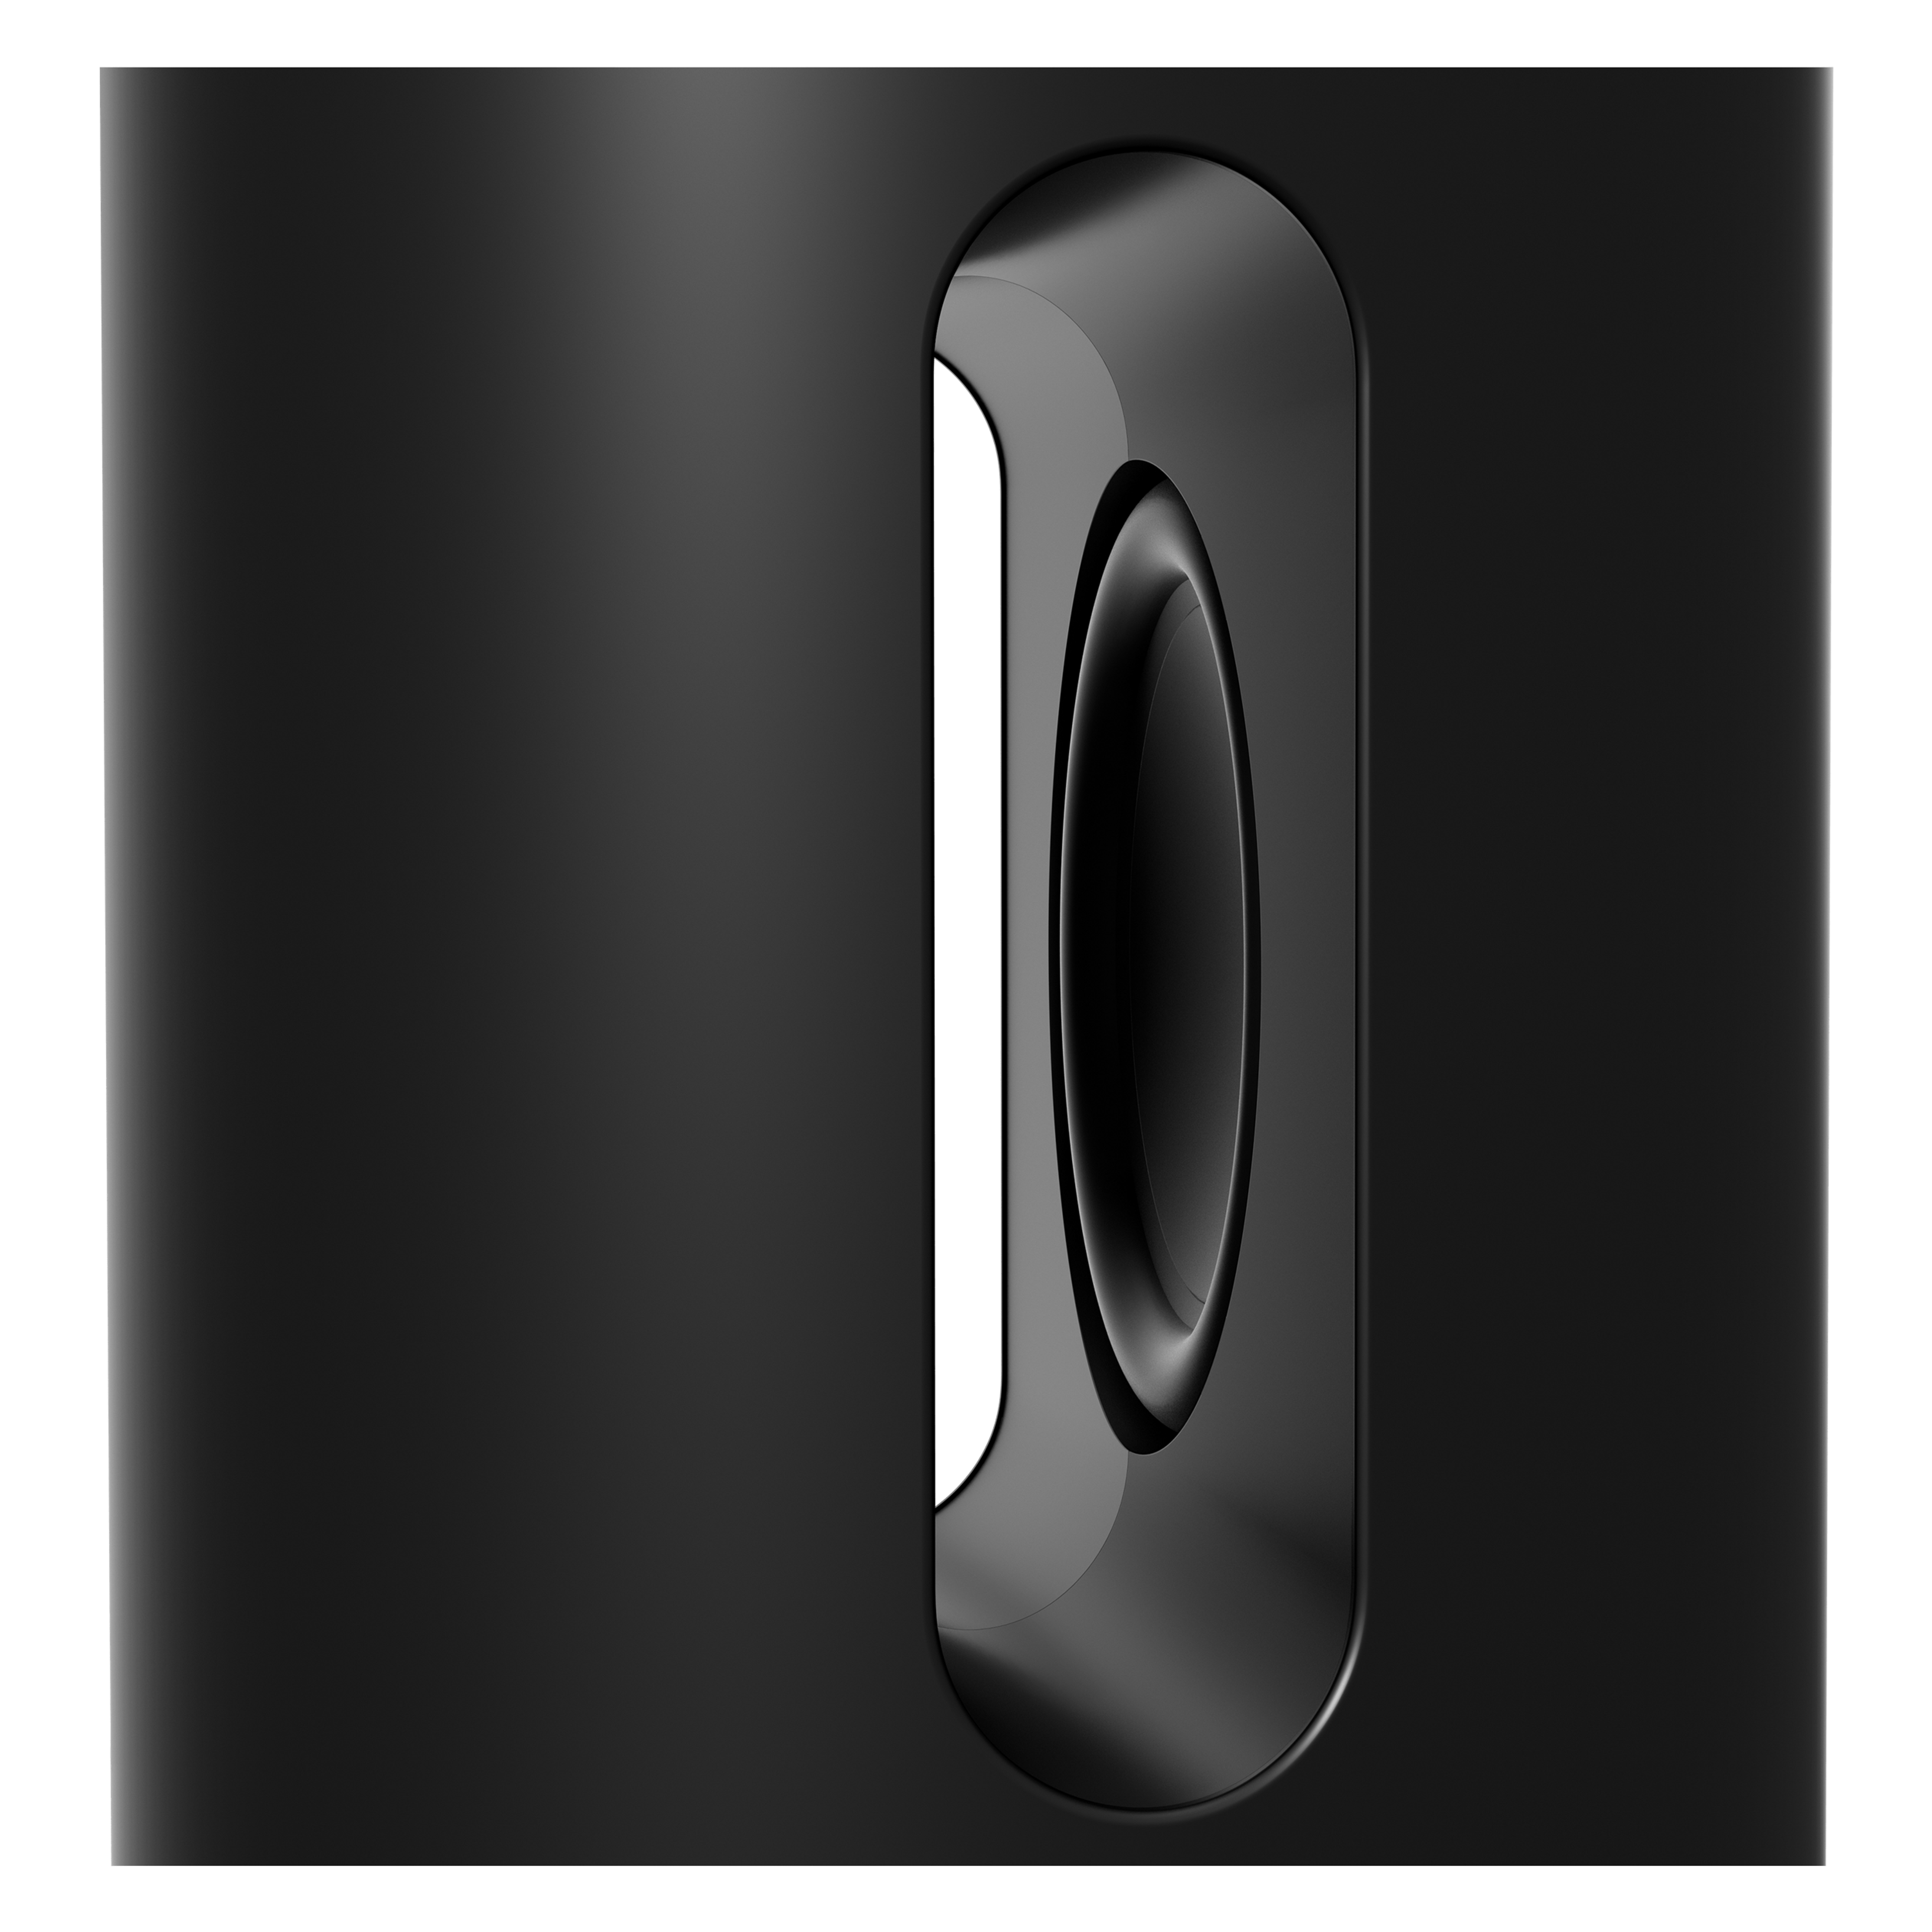 Sub Mini: The Compact Subwoofer with Bass | Sonos